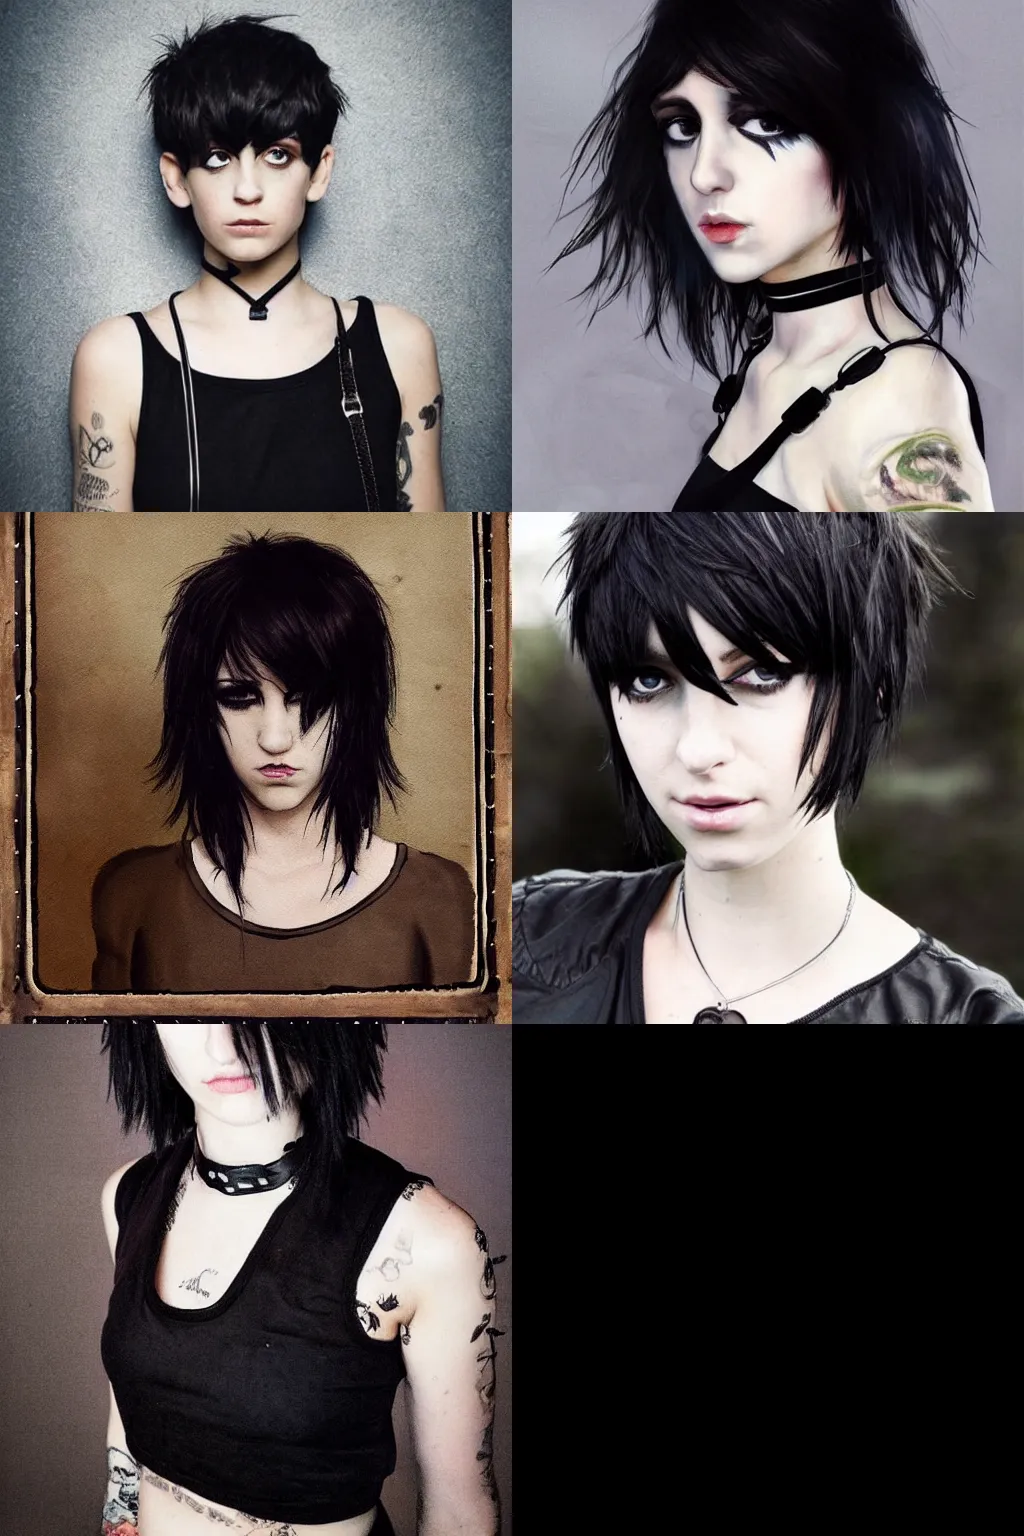 Prompt: an emo portrait by sophie anderson. her hair is dark brown and cut into a short, messy pixie cut. she has a slightly rounded face, with a pointed chin, large entirely - black eyes, and a small nose. she is wearing a black tank top, a black leather jacket, a black knee - length skirt, and a black choker..